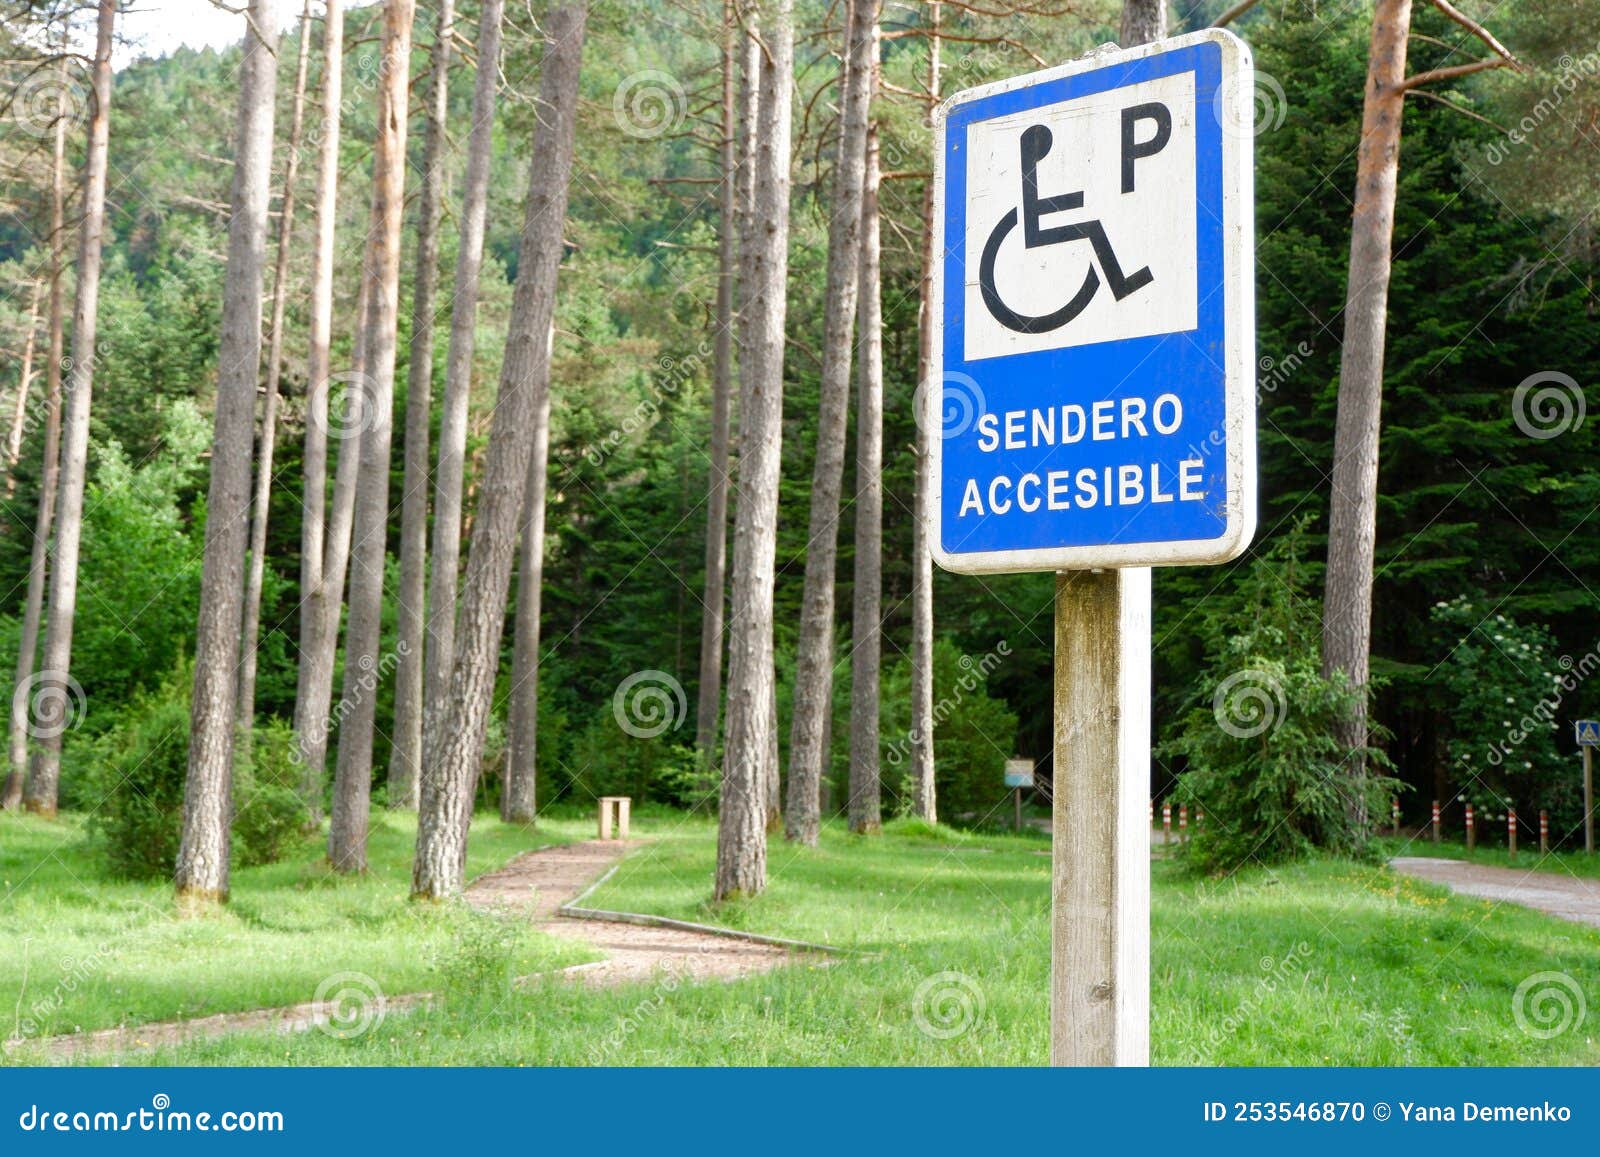 Road Sign for Accessible Parking in the Forest Outside in Bielsa